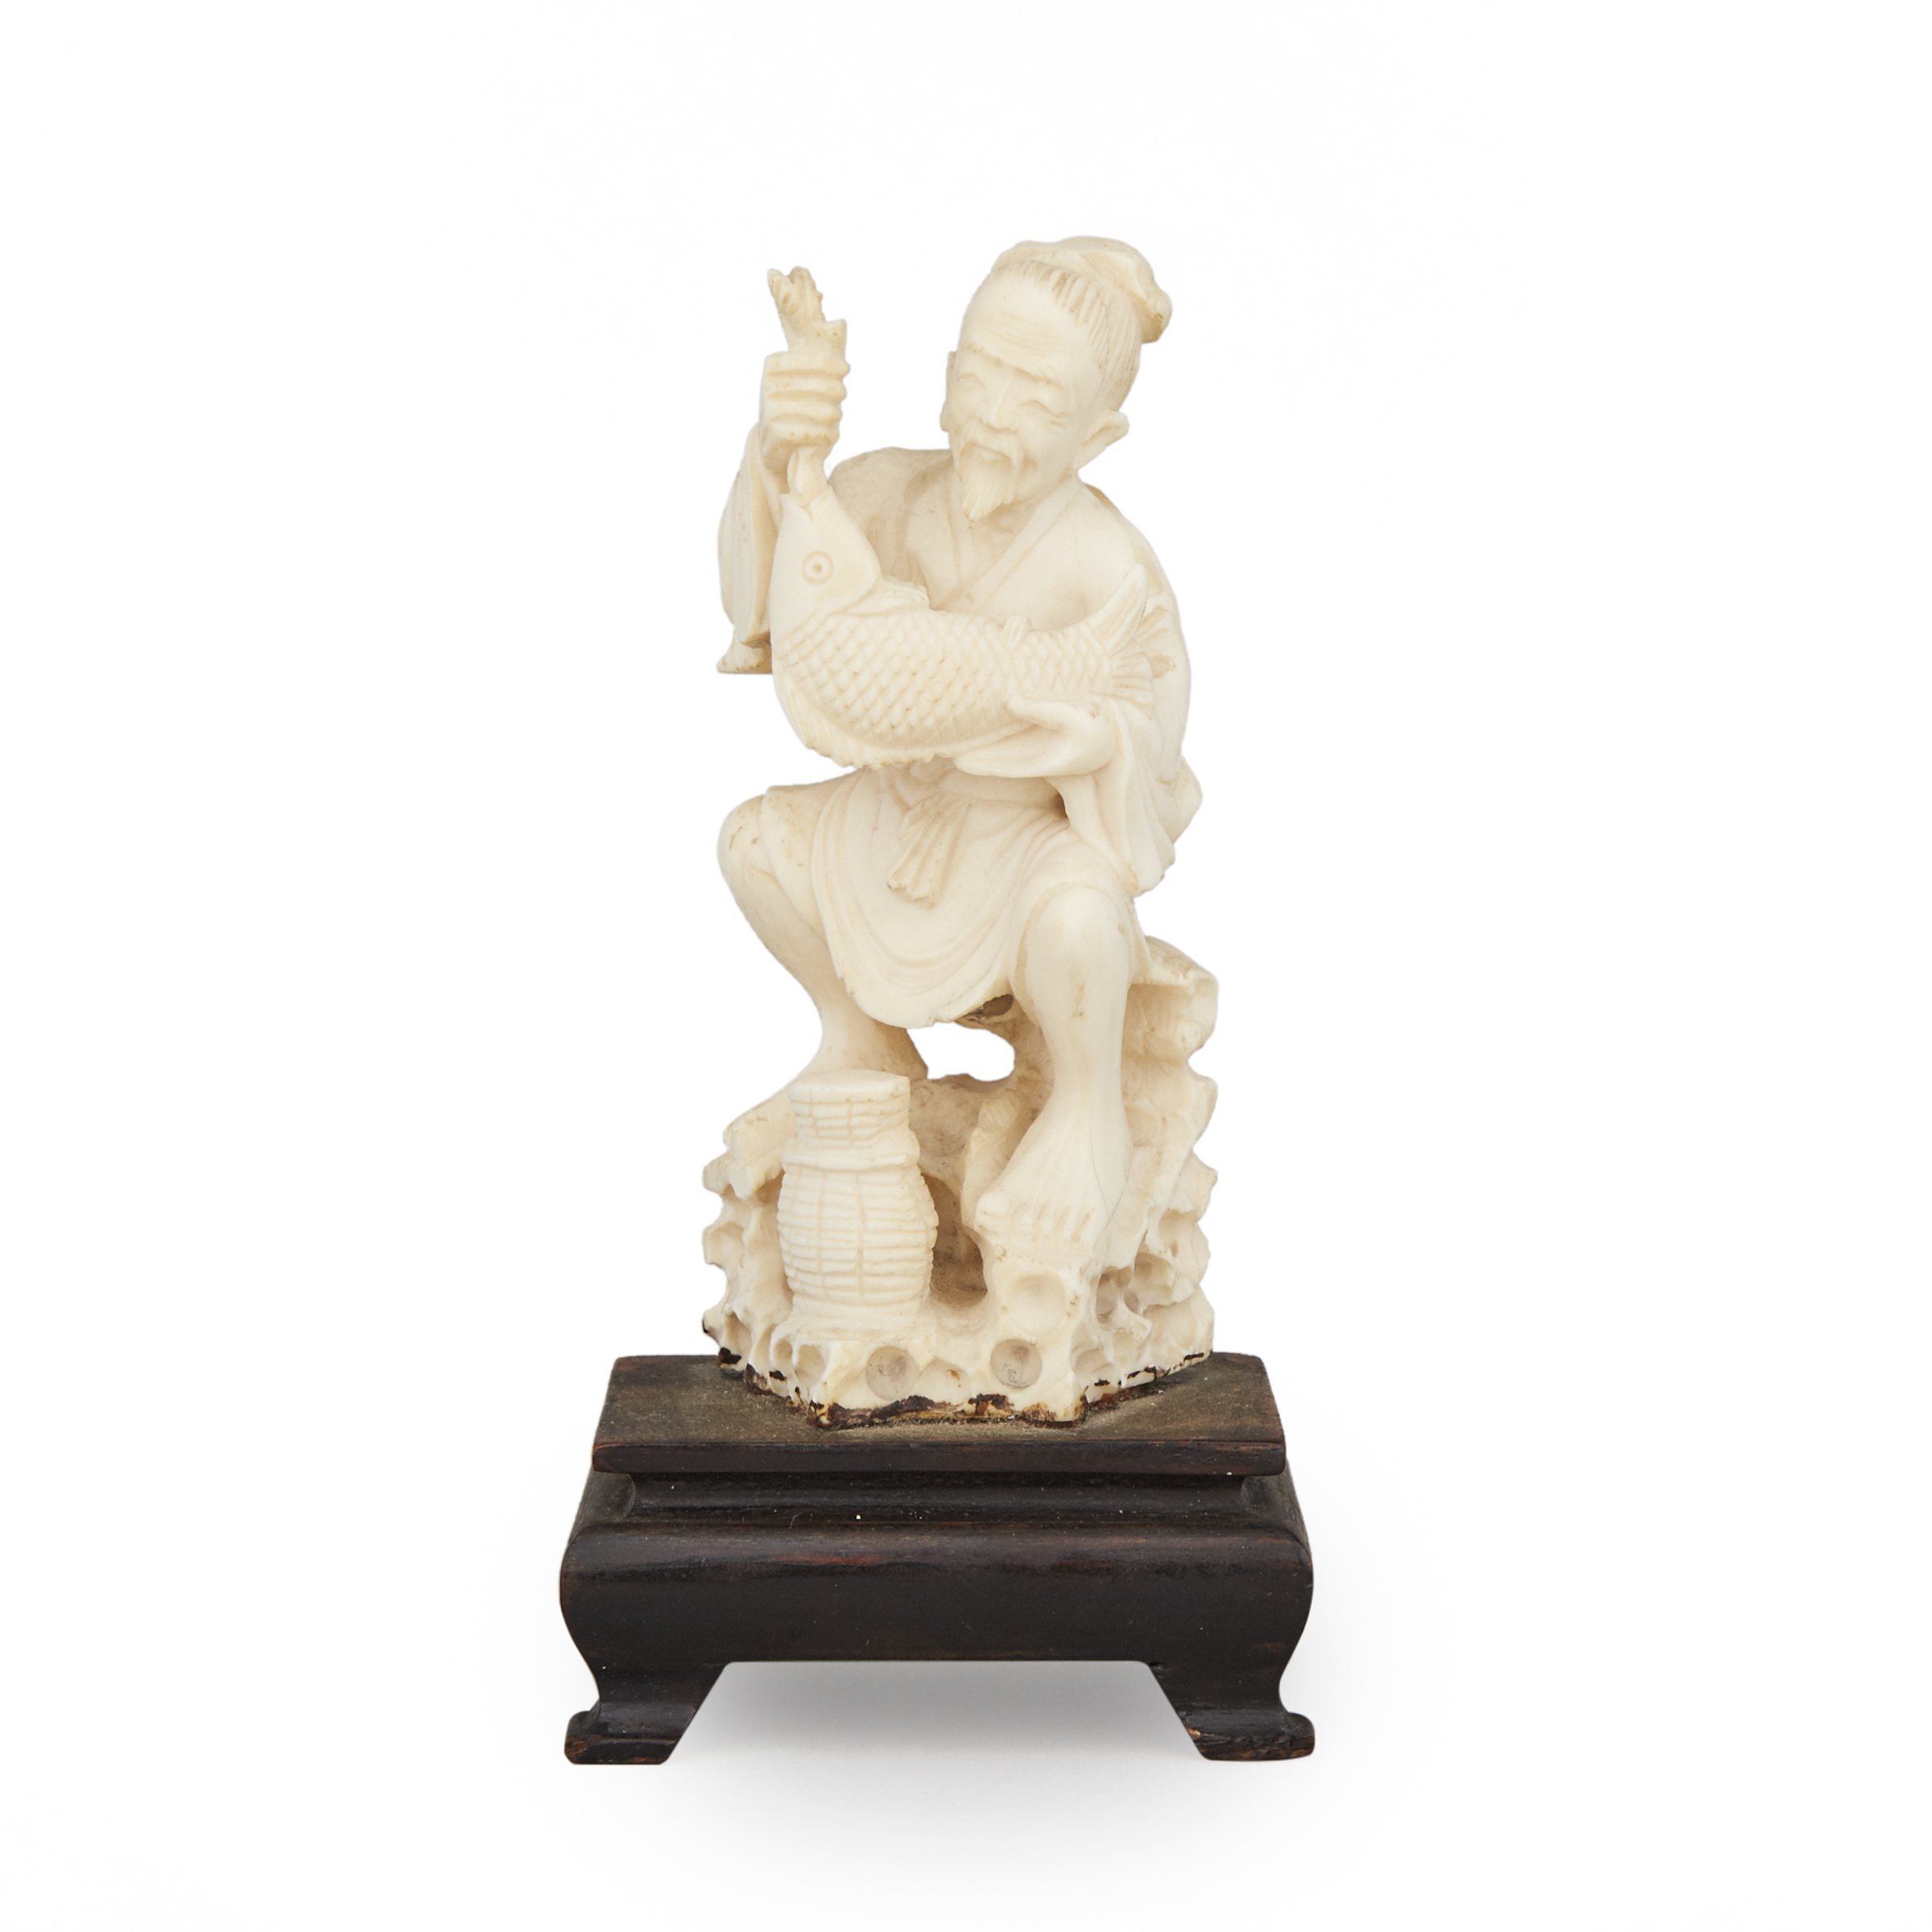 An Ivory Carved Fisherman